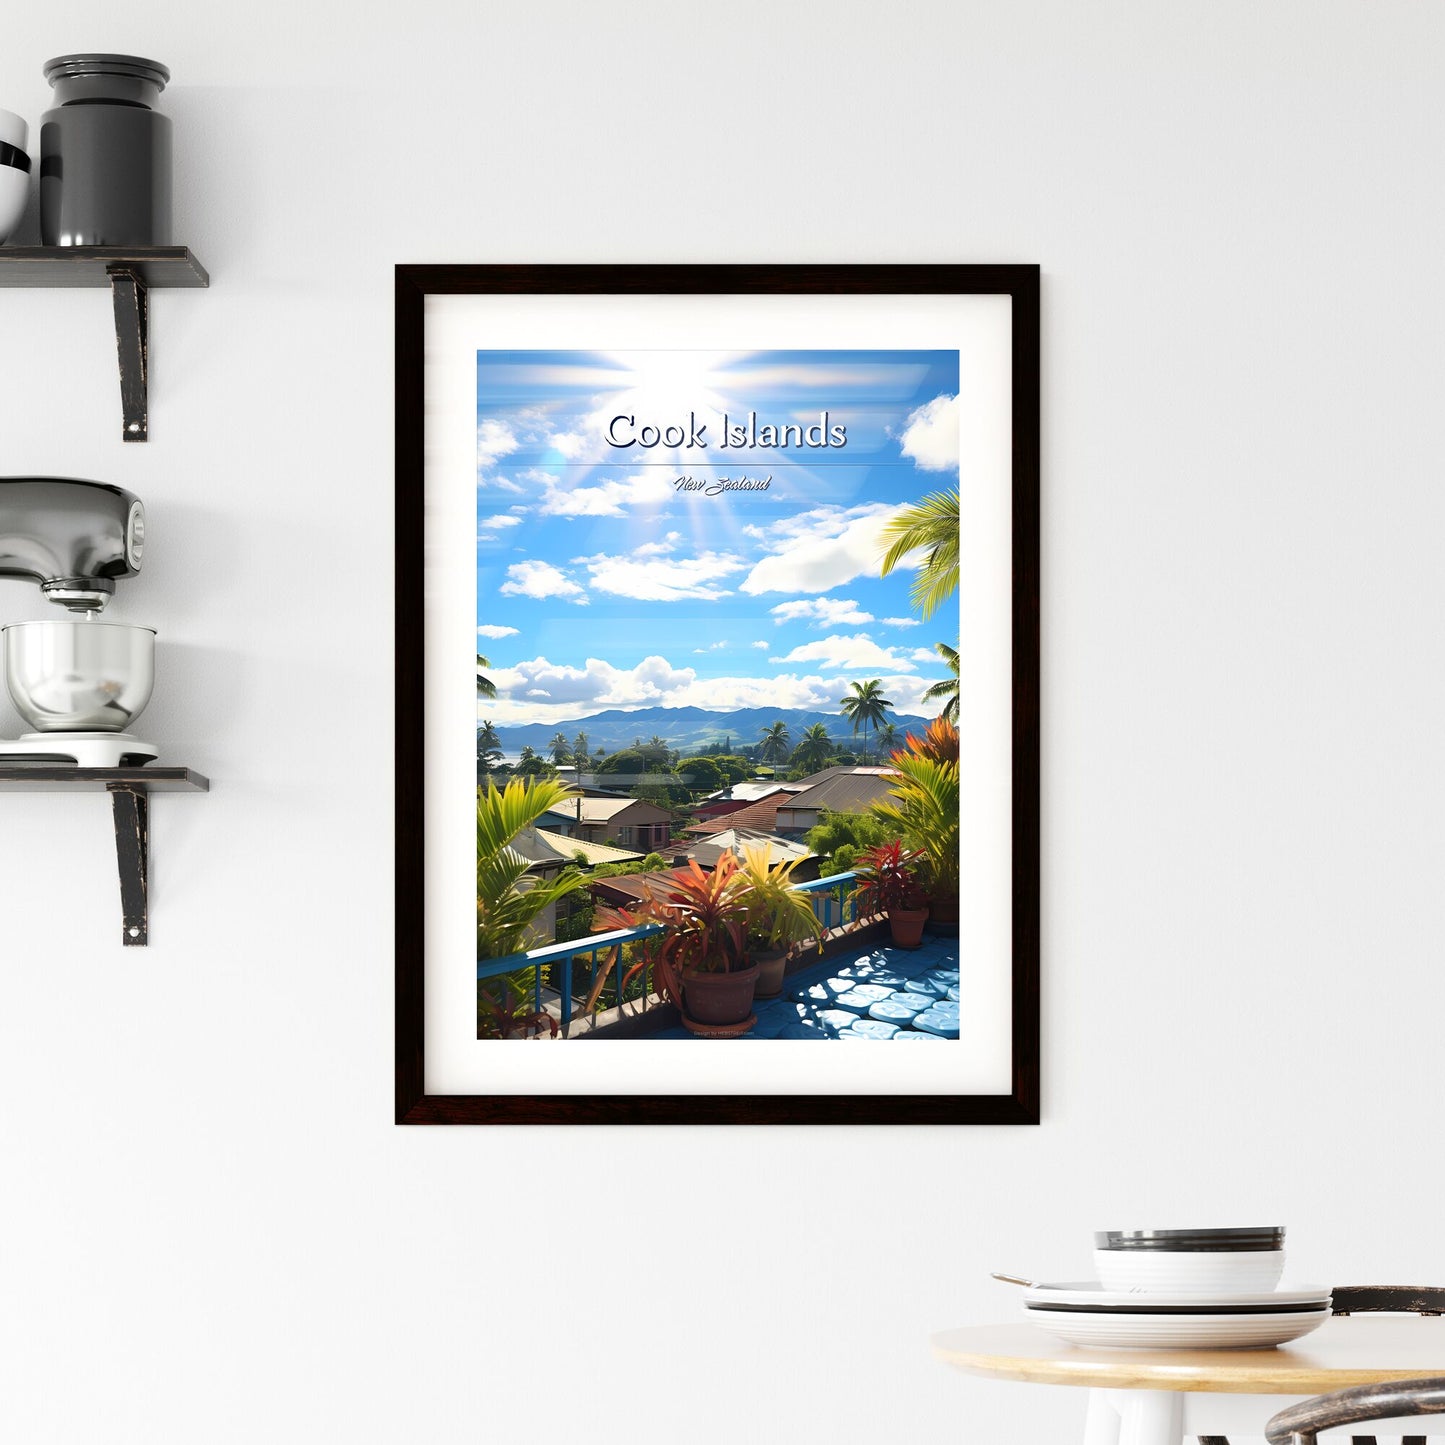 On the roofs of Cook Islands, New Zealand - Art print of a balcony with palm trees and a blue railing Default Title